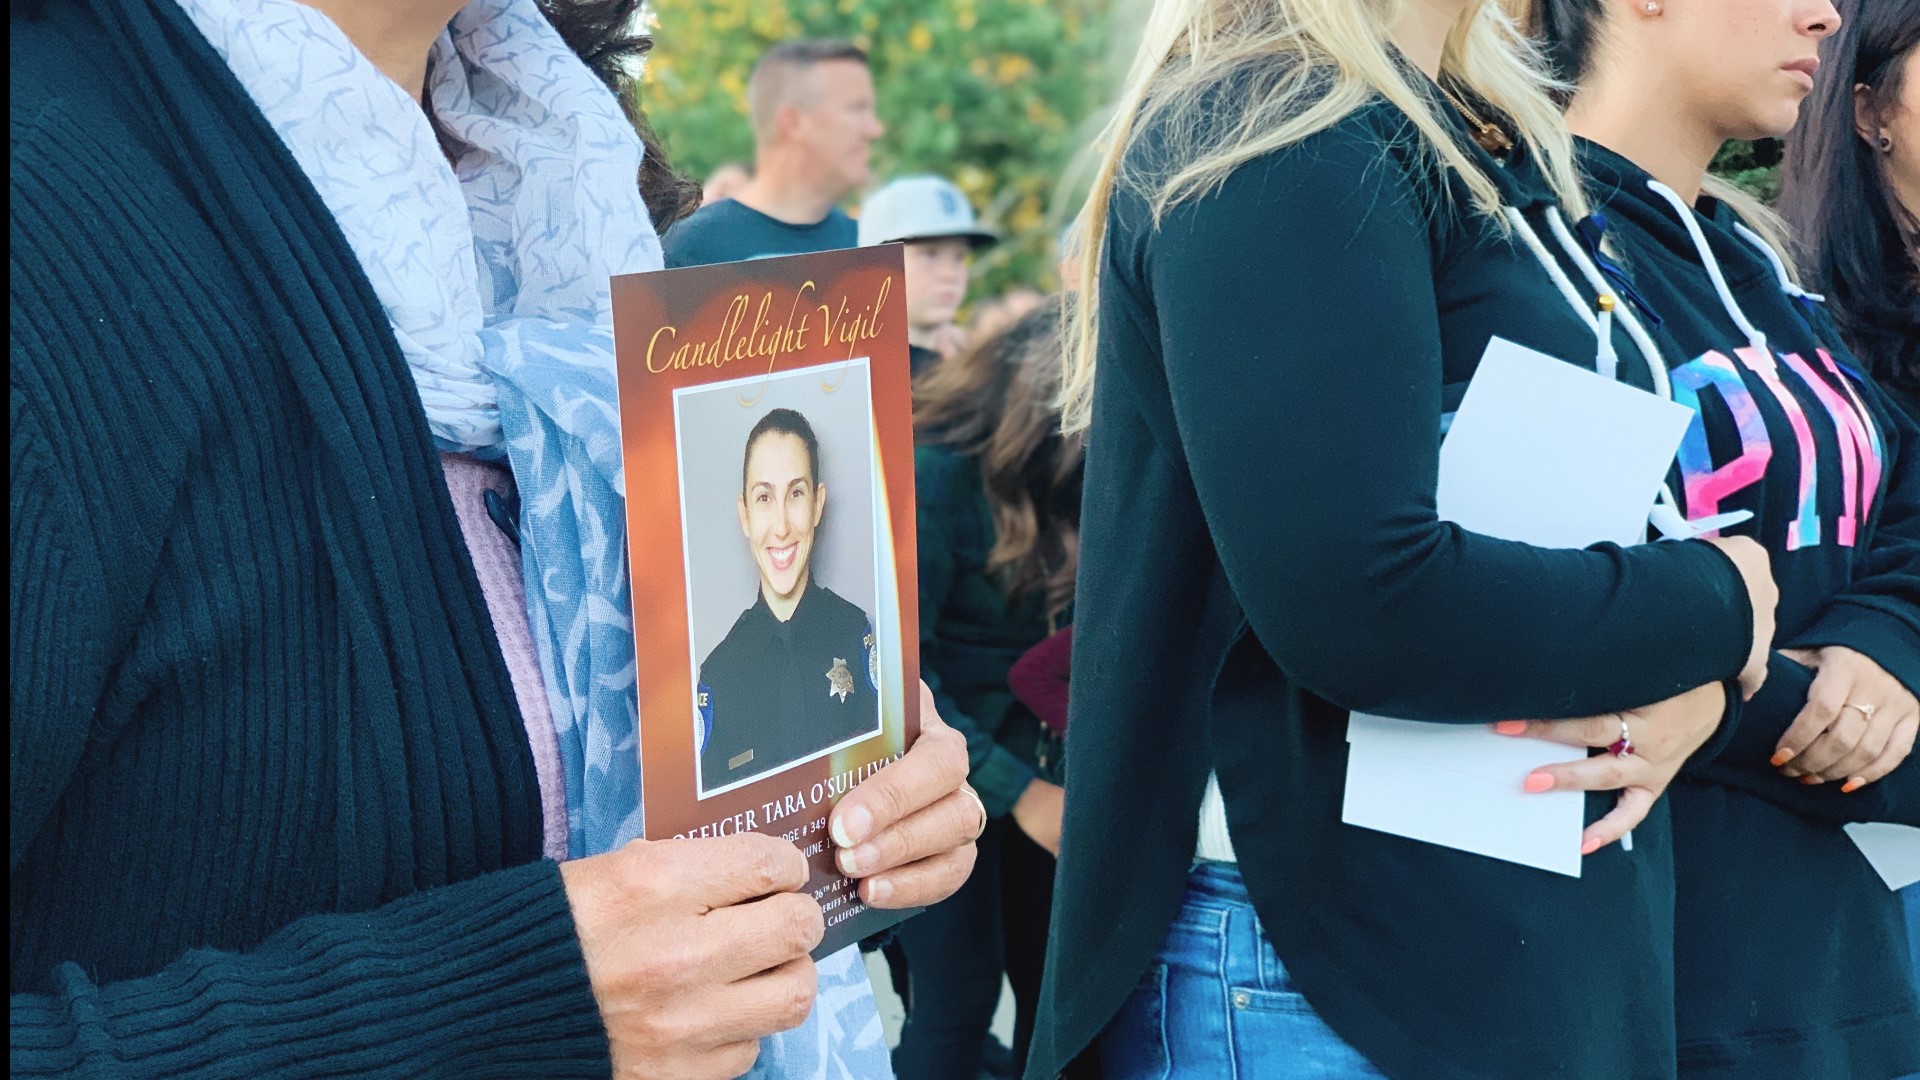 A vigil was held, Wednesday evening, at the Sacramento Police and Sheriff's Memorial to remember fallen Sacramento Police Officer Tara O'Sullivan. Friends, family, and law enforcement agencies paid their respects and showed their support at a candlelight vigil in memory of O'Sullivan. Hundreds attended.